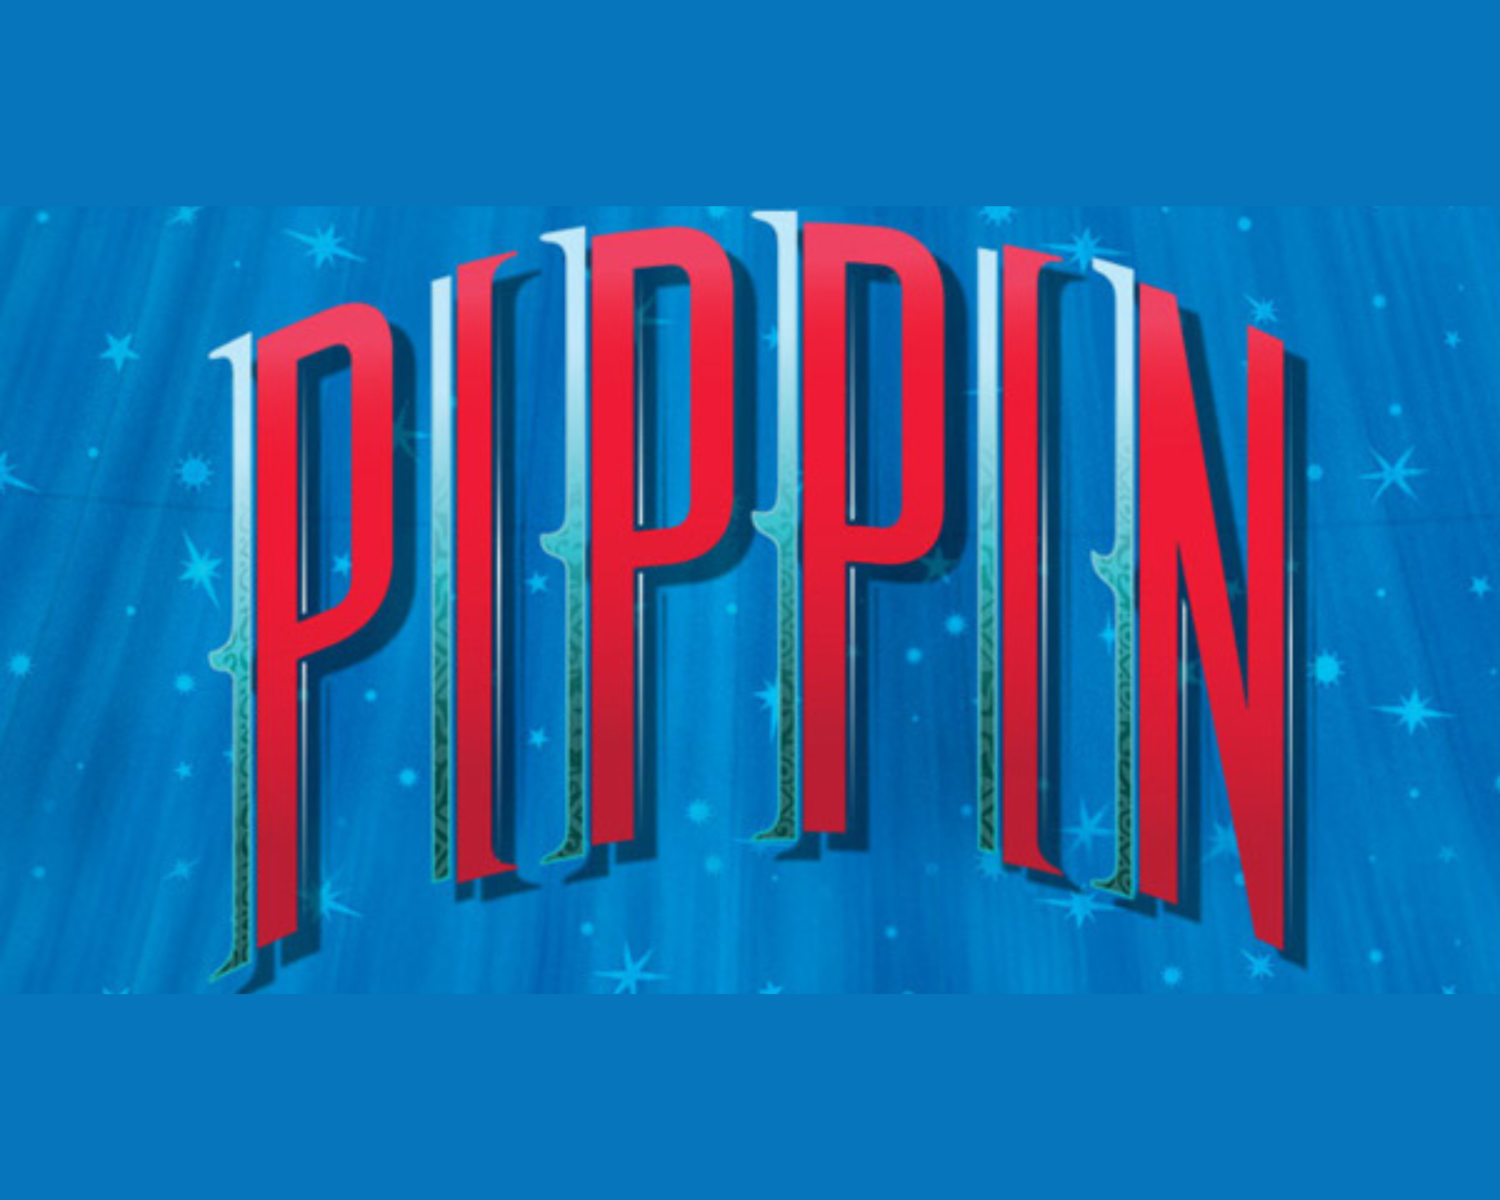 pippin in red letters on blue background